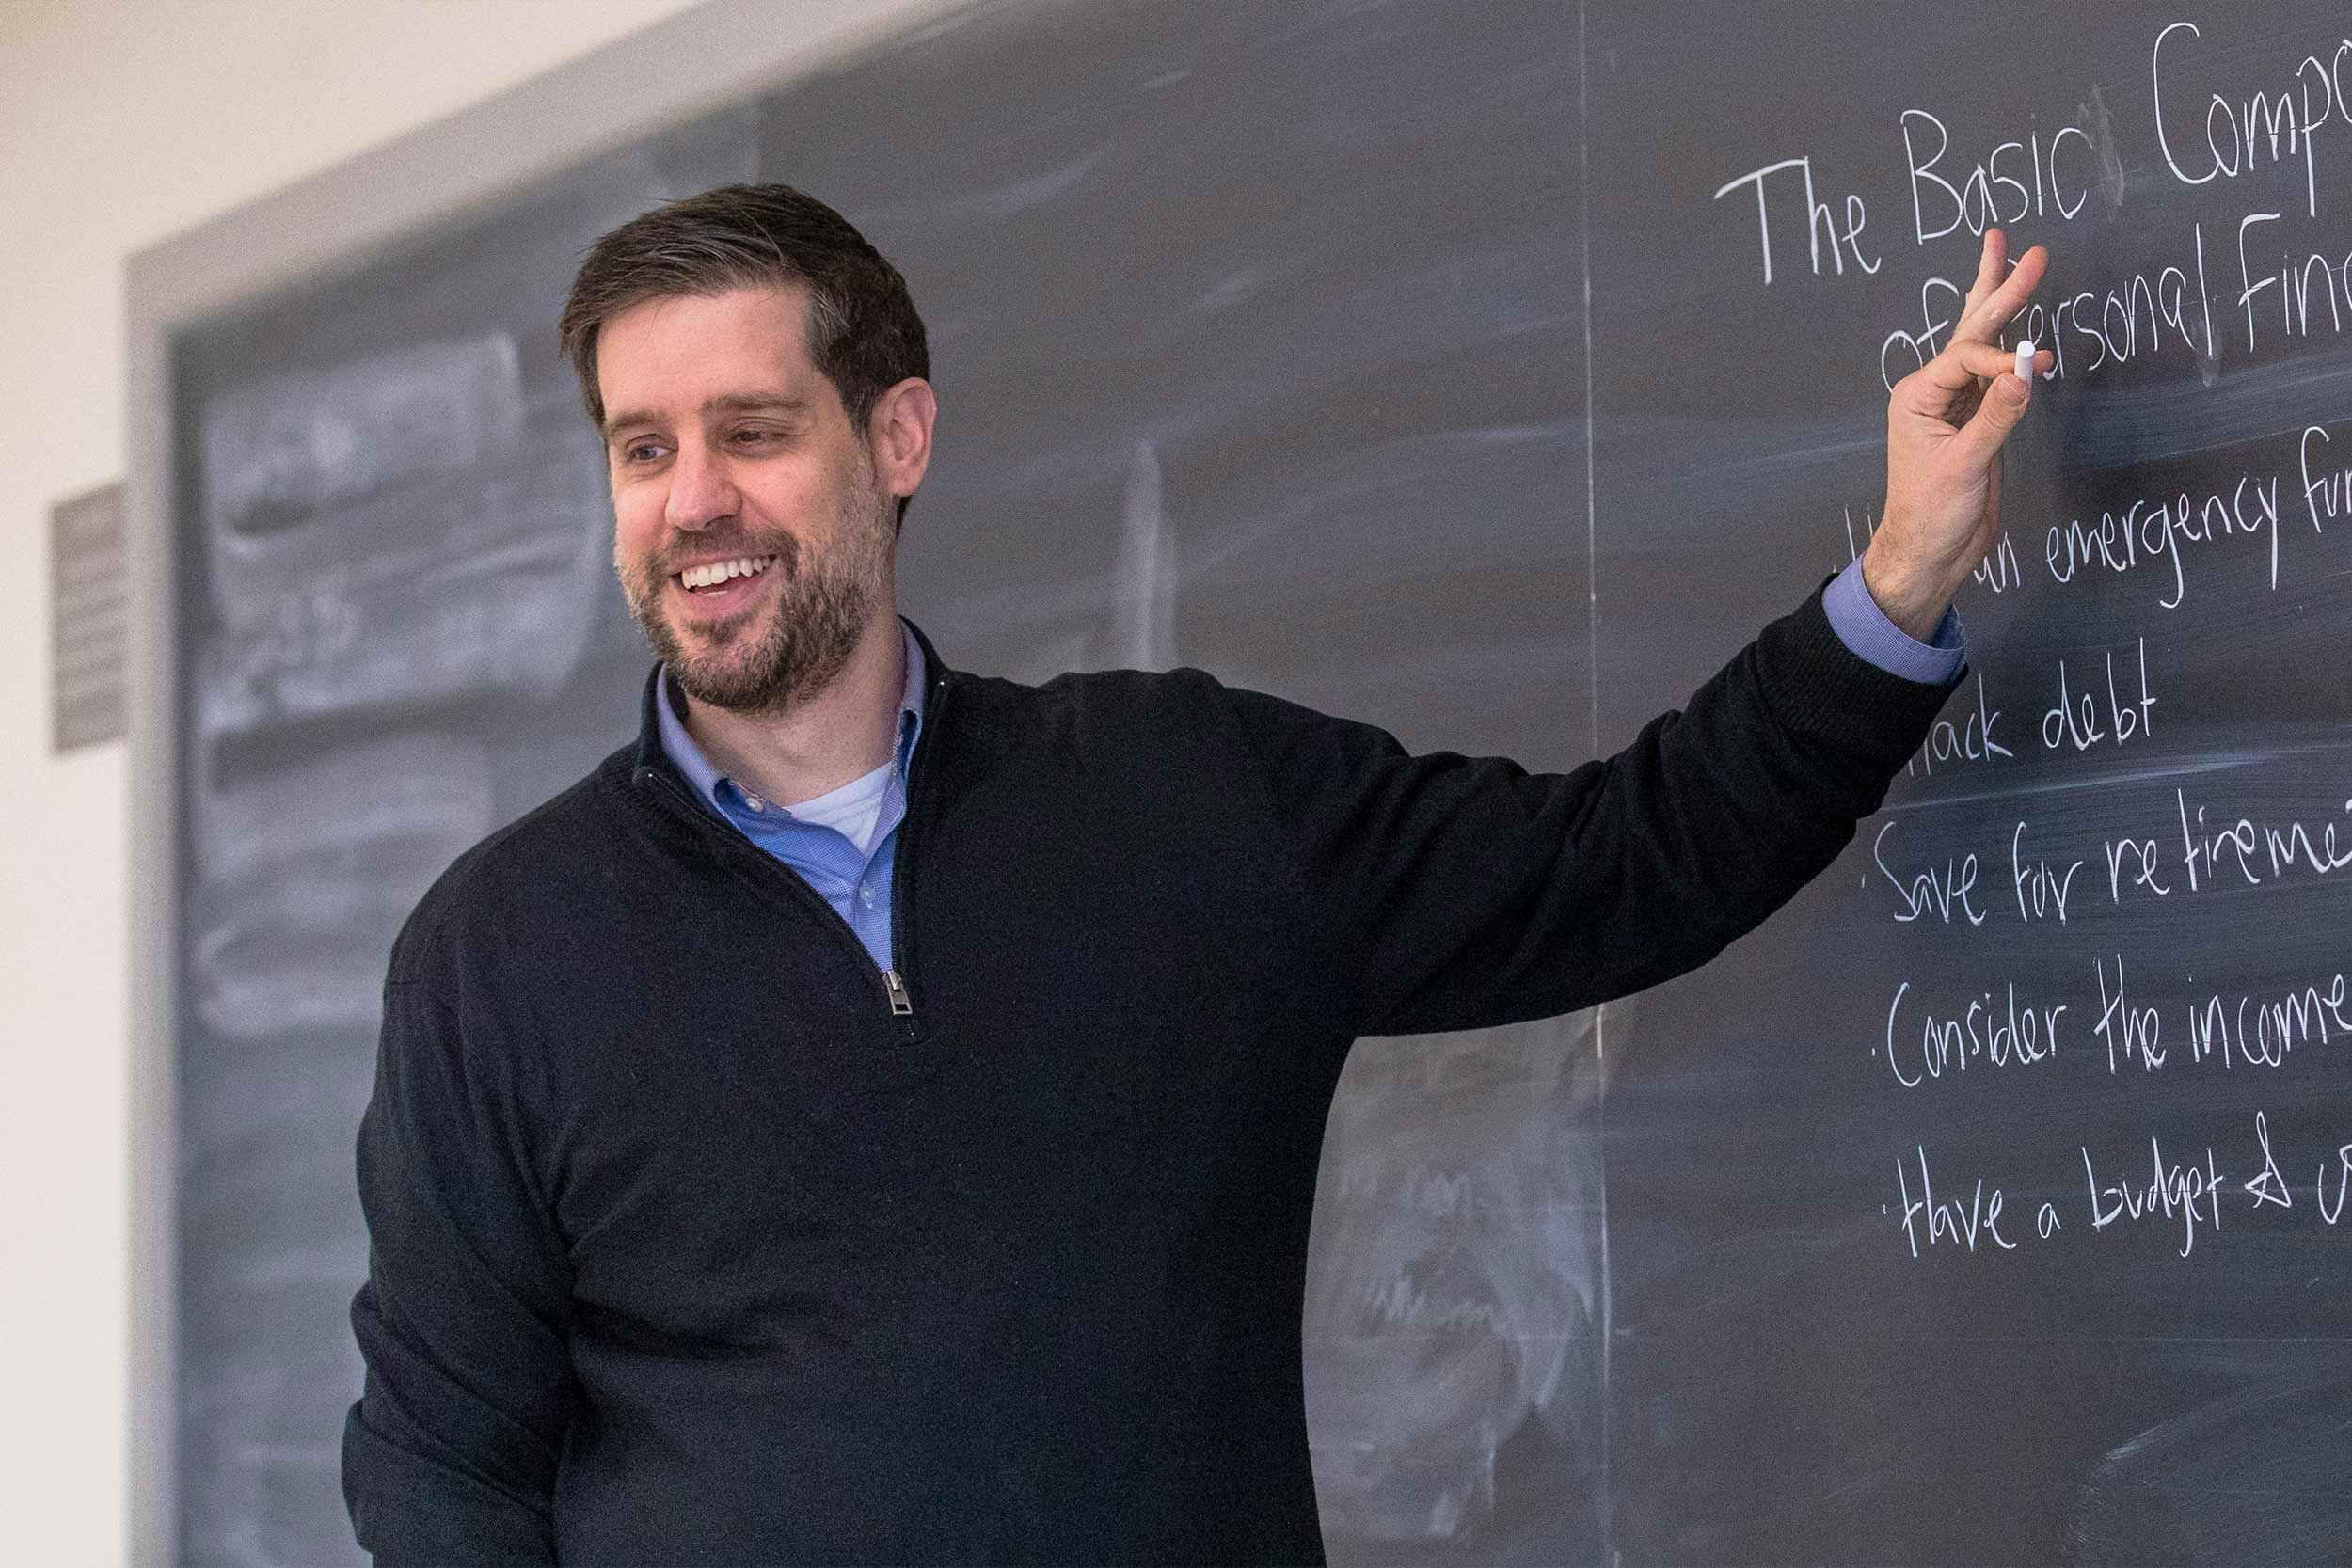 Professor Andrew Pennock smiling in front of a class while at the chalkboard